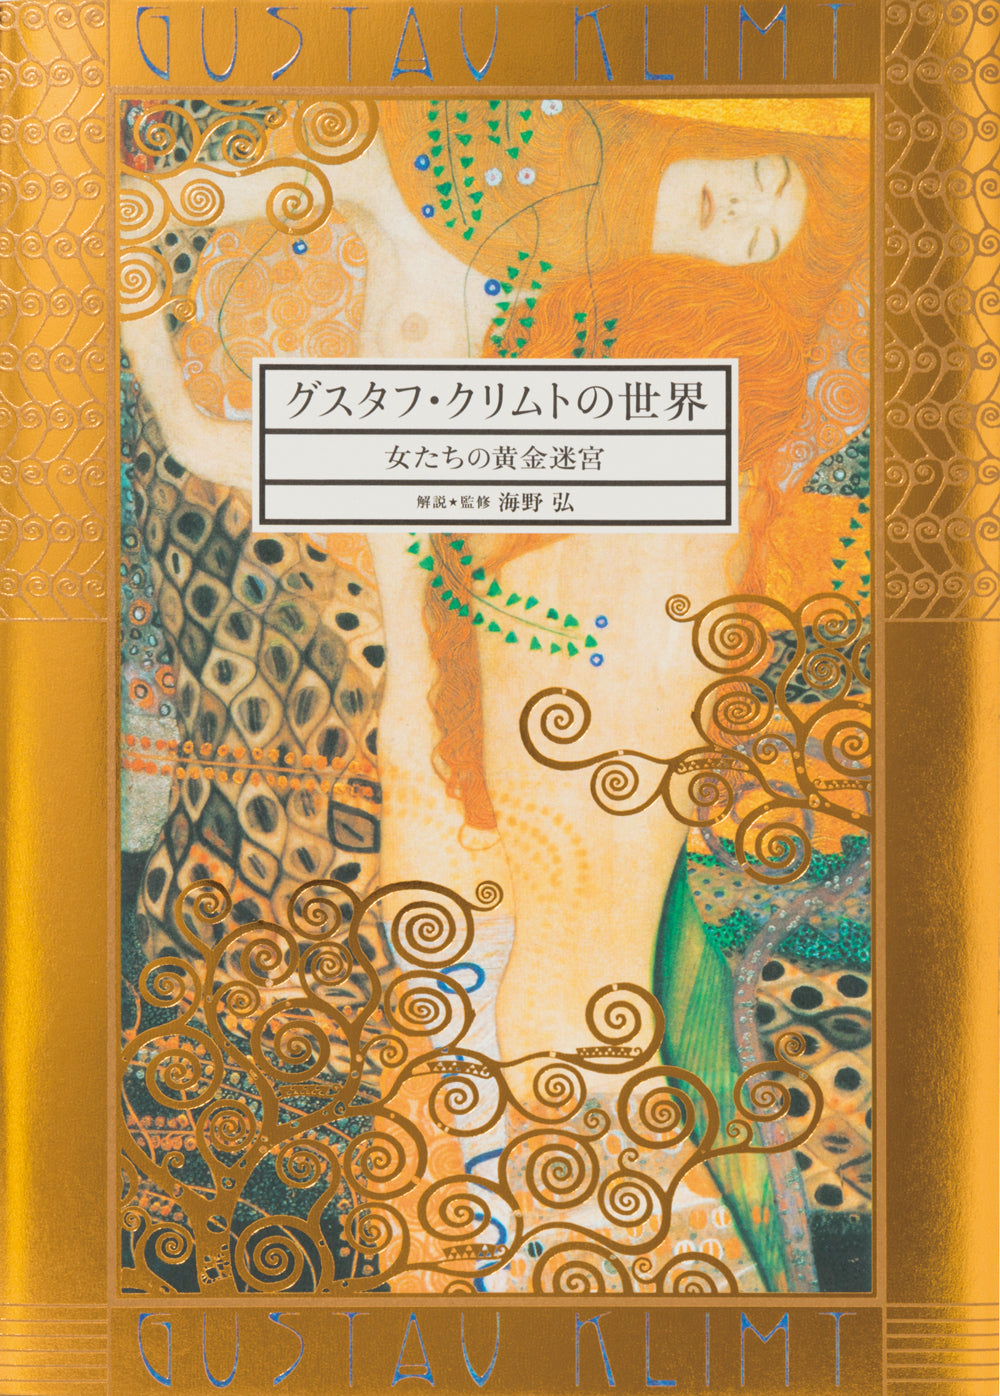 World of Klimt, The (Japanese only, mostly visual) cover